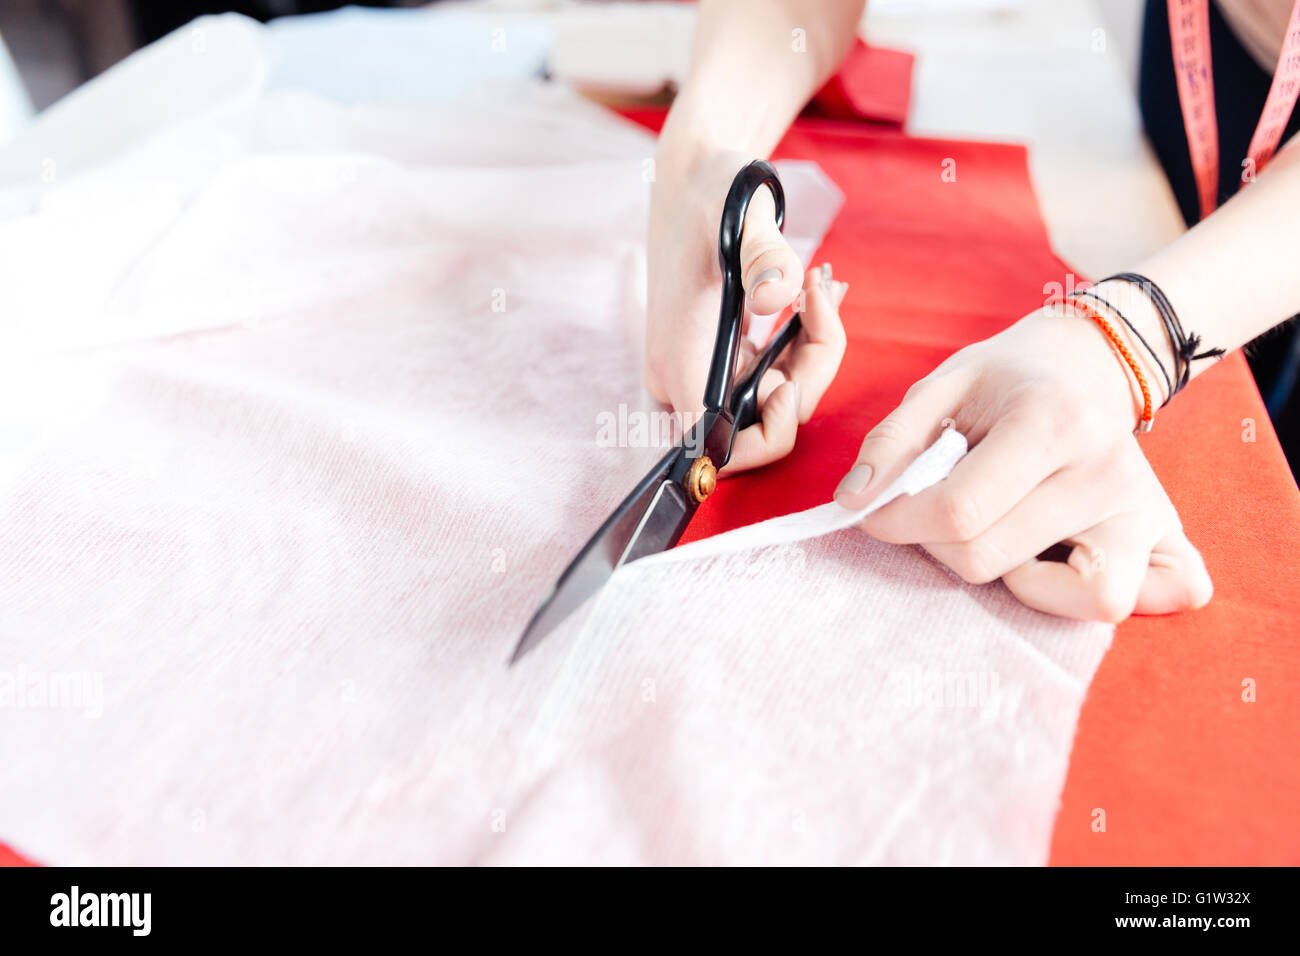 Hands of young woman seamstress with scissors cutting white fabric Stock Photo